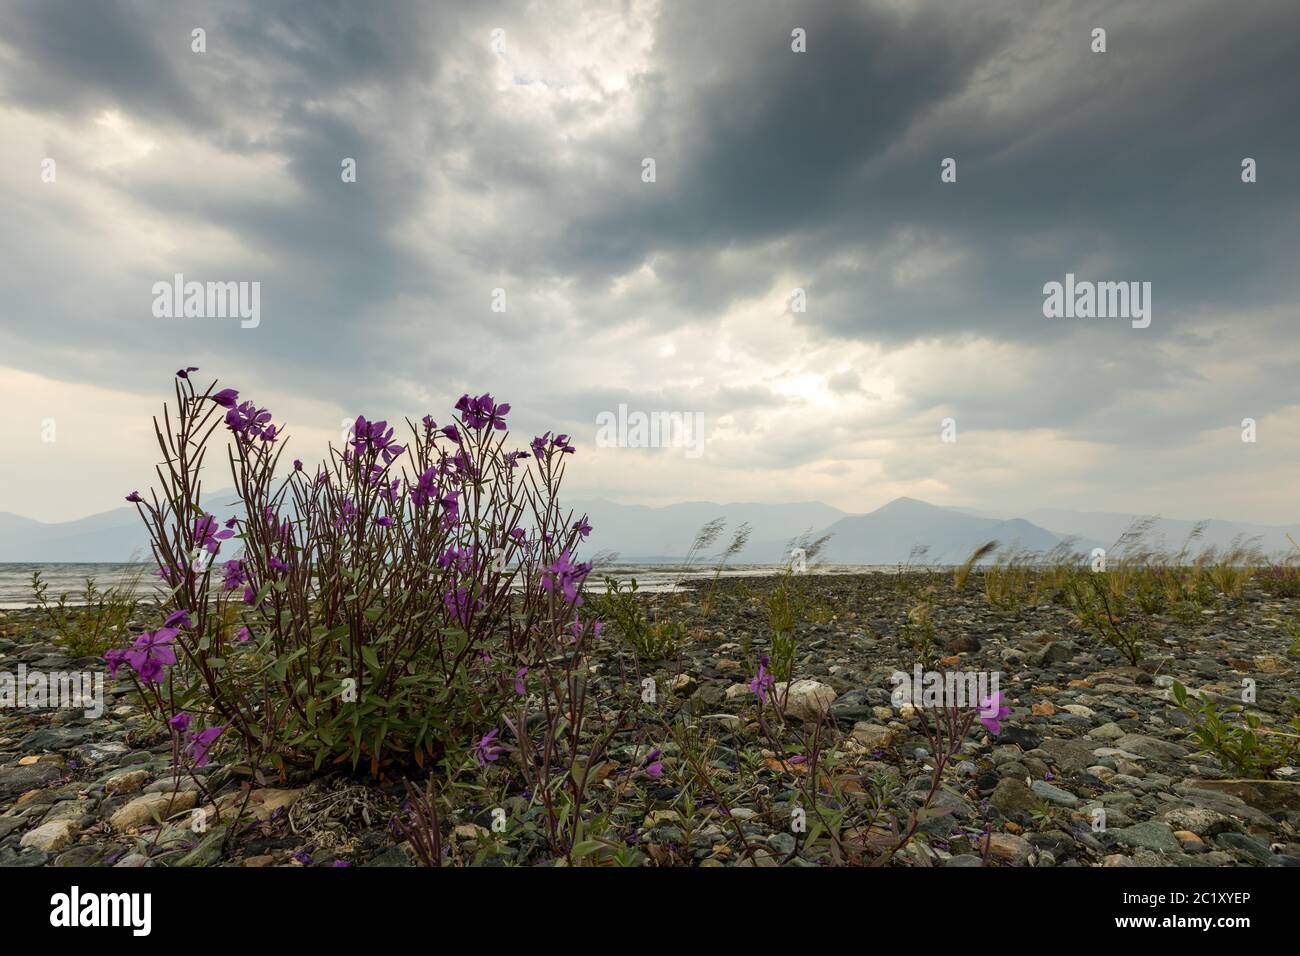 Lake Kluane National Park in Clouds and Storm Stockfoto